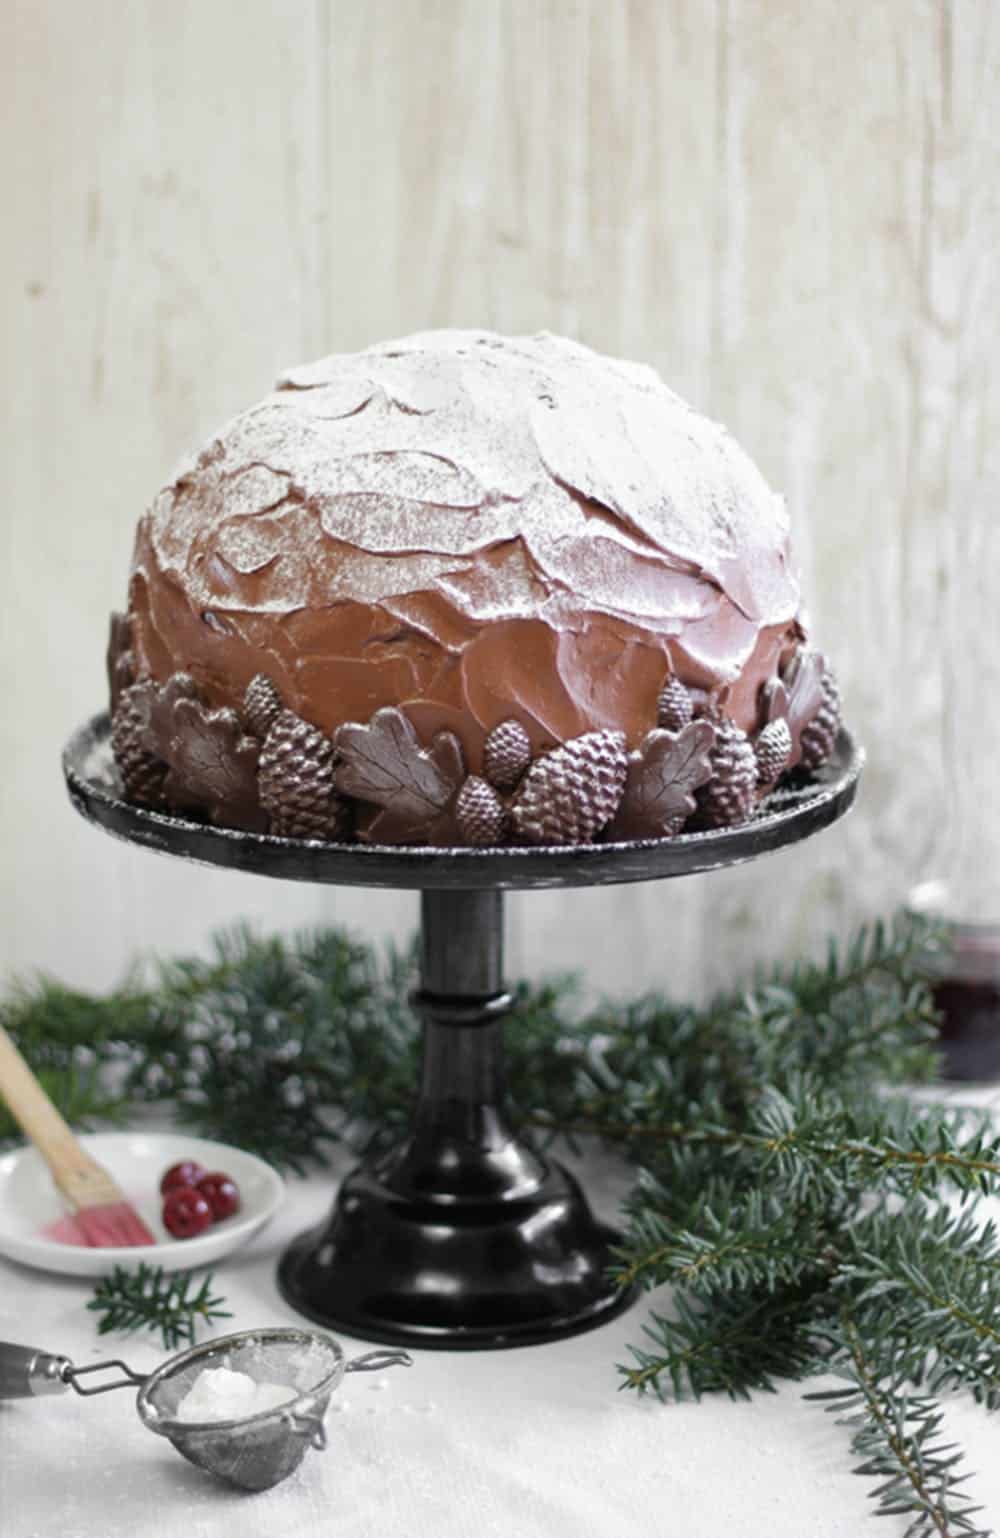 Black forest dome cake